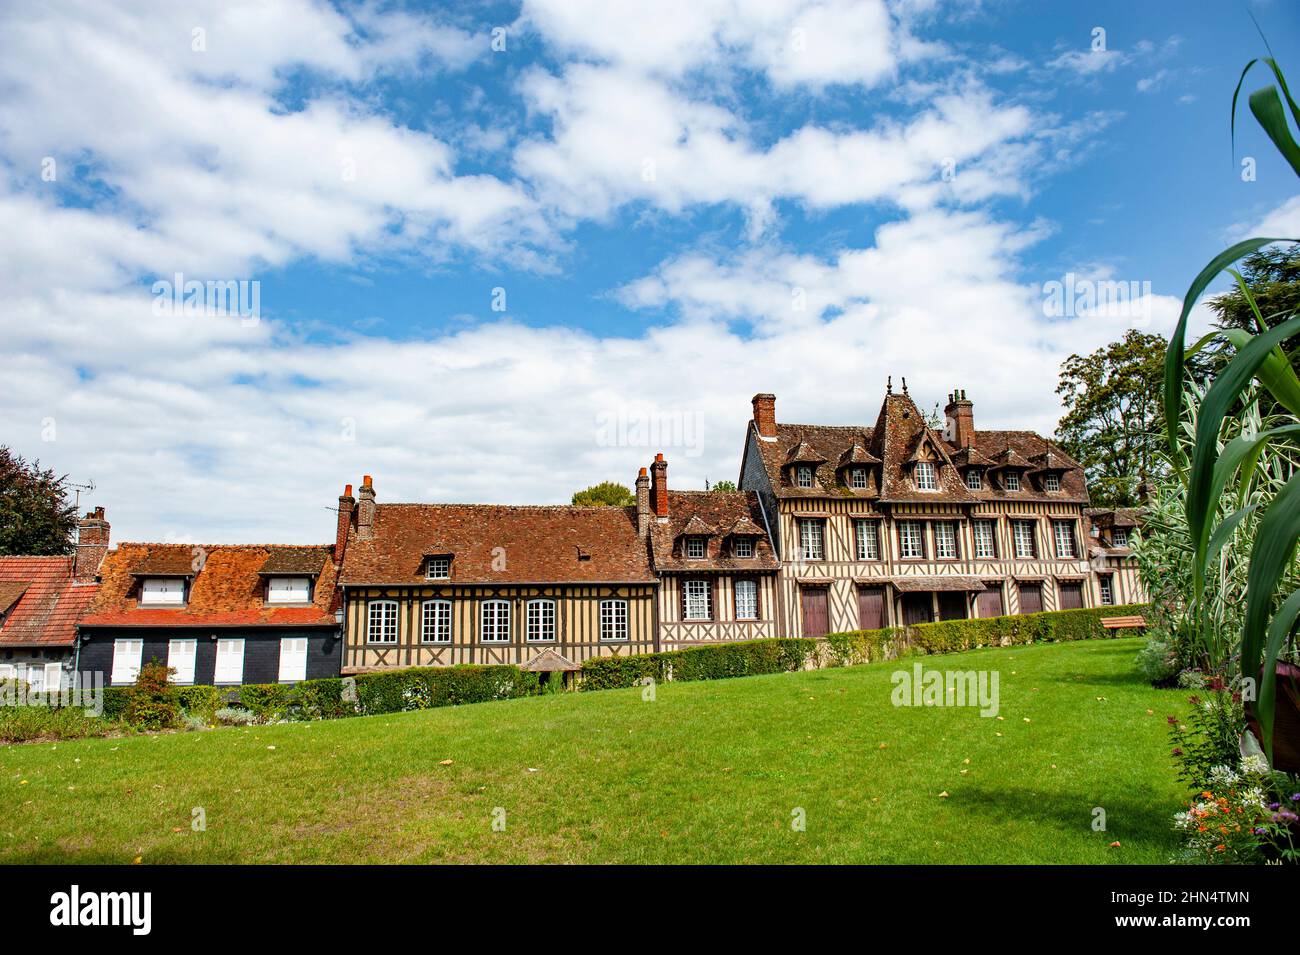 The house to the right is the one the composer Maurice Ravel lived during his stay in Lyons-la-Forêt, Normandy, France Stock Photo